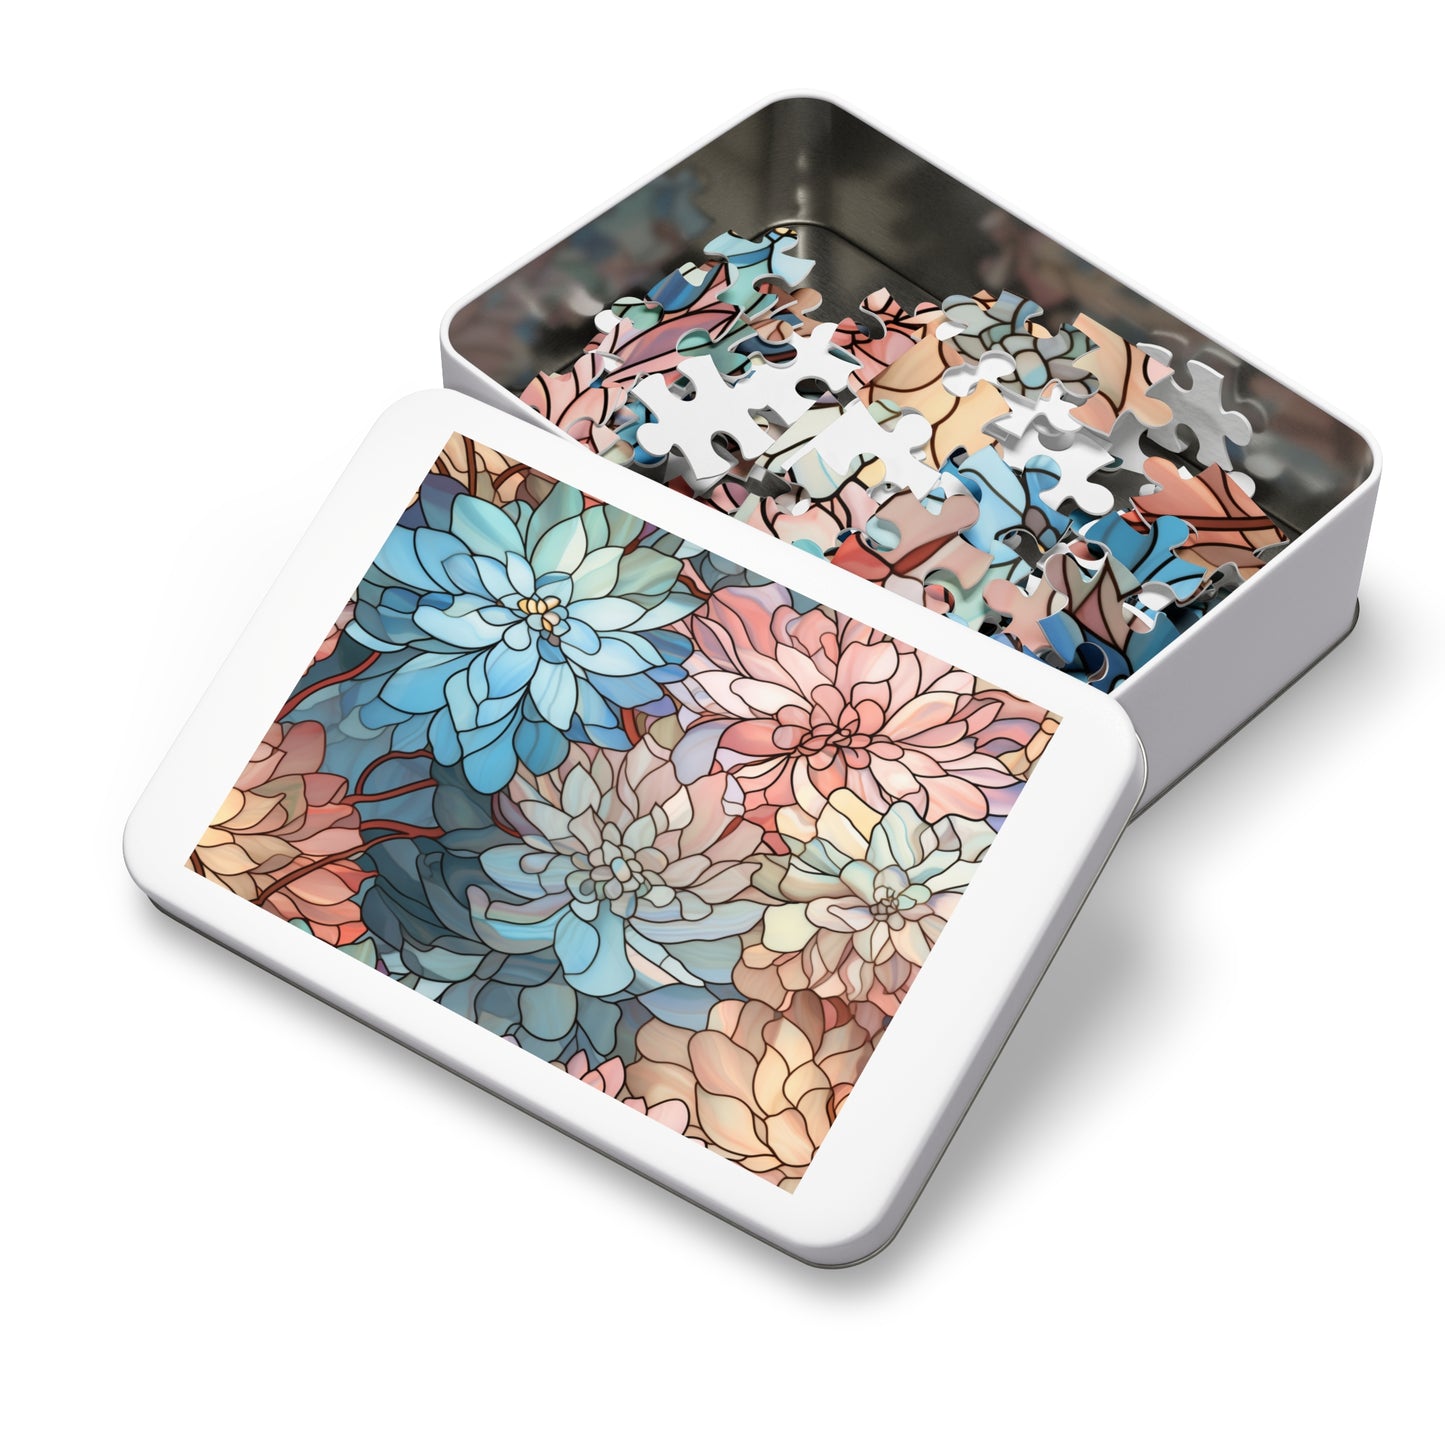 Stained Glass Flowers Jigsaw Puzzle